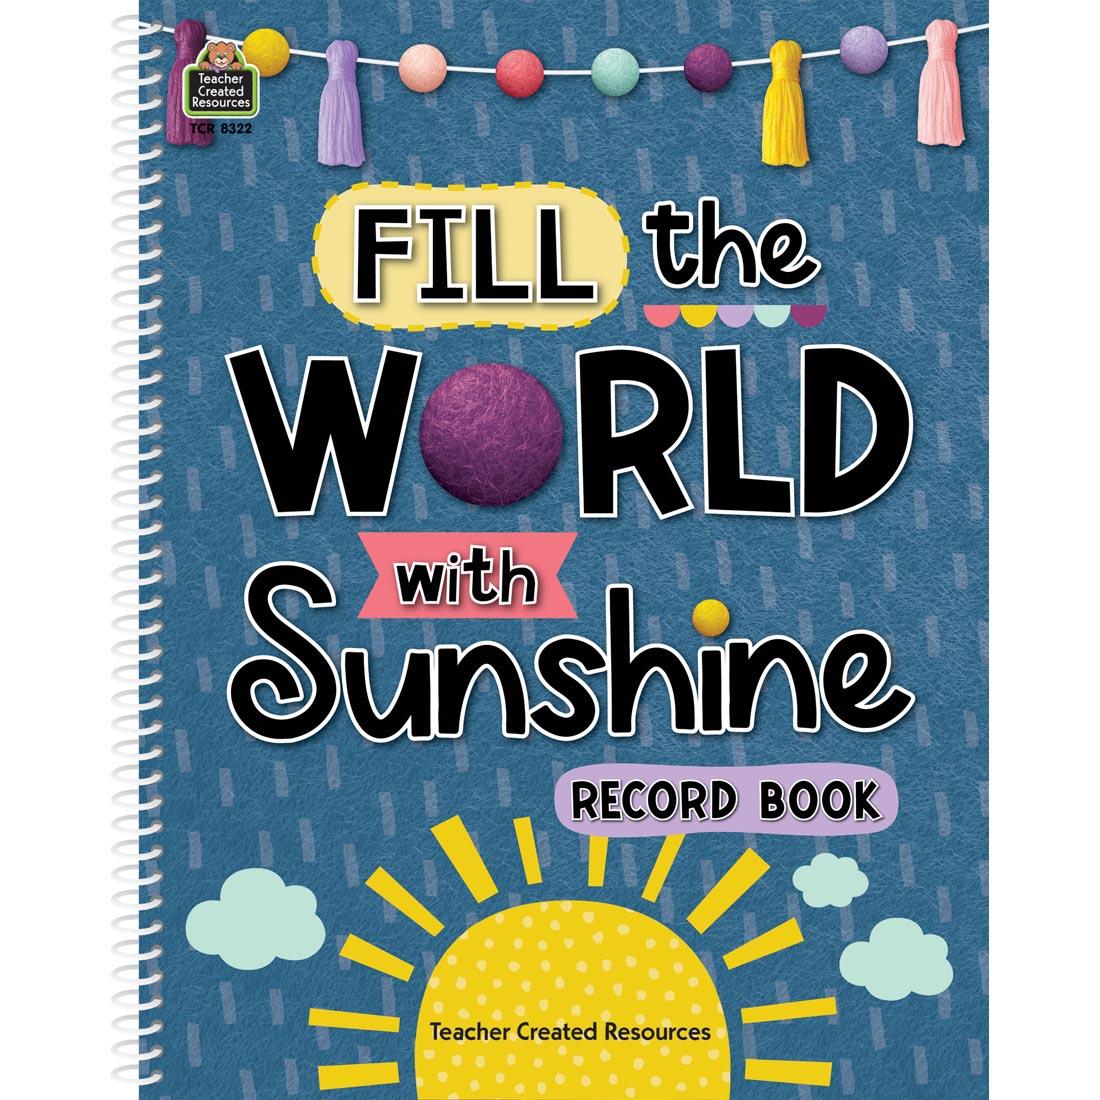 Record Book from the Oh Happy Day collection by Teacher Created Resources reads Fill the world with sunshine